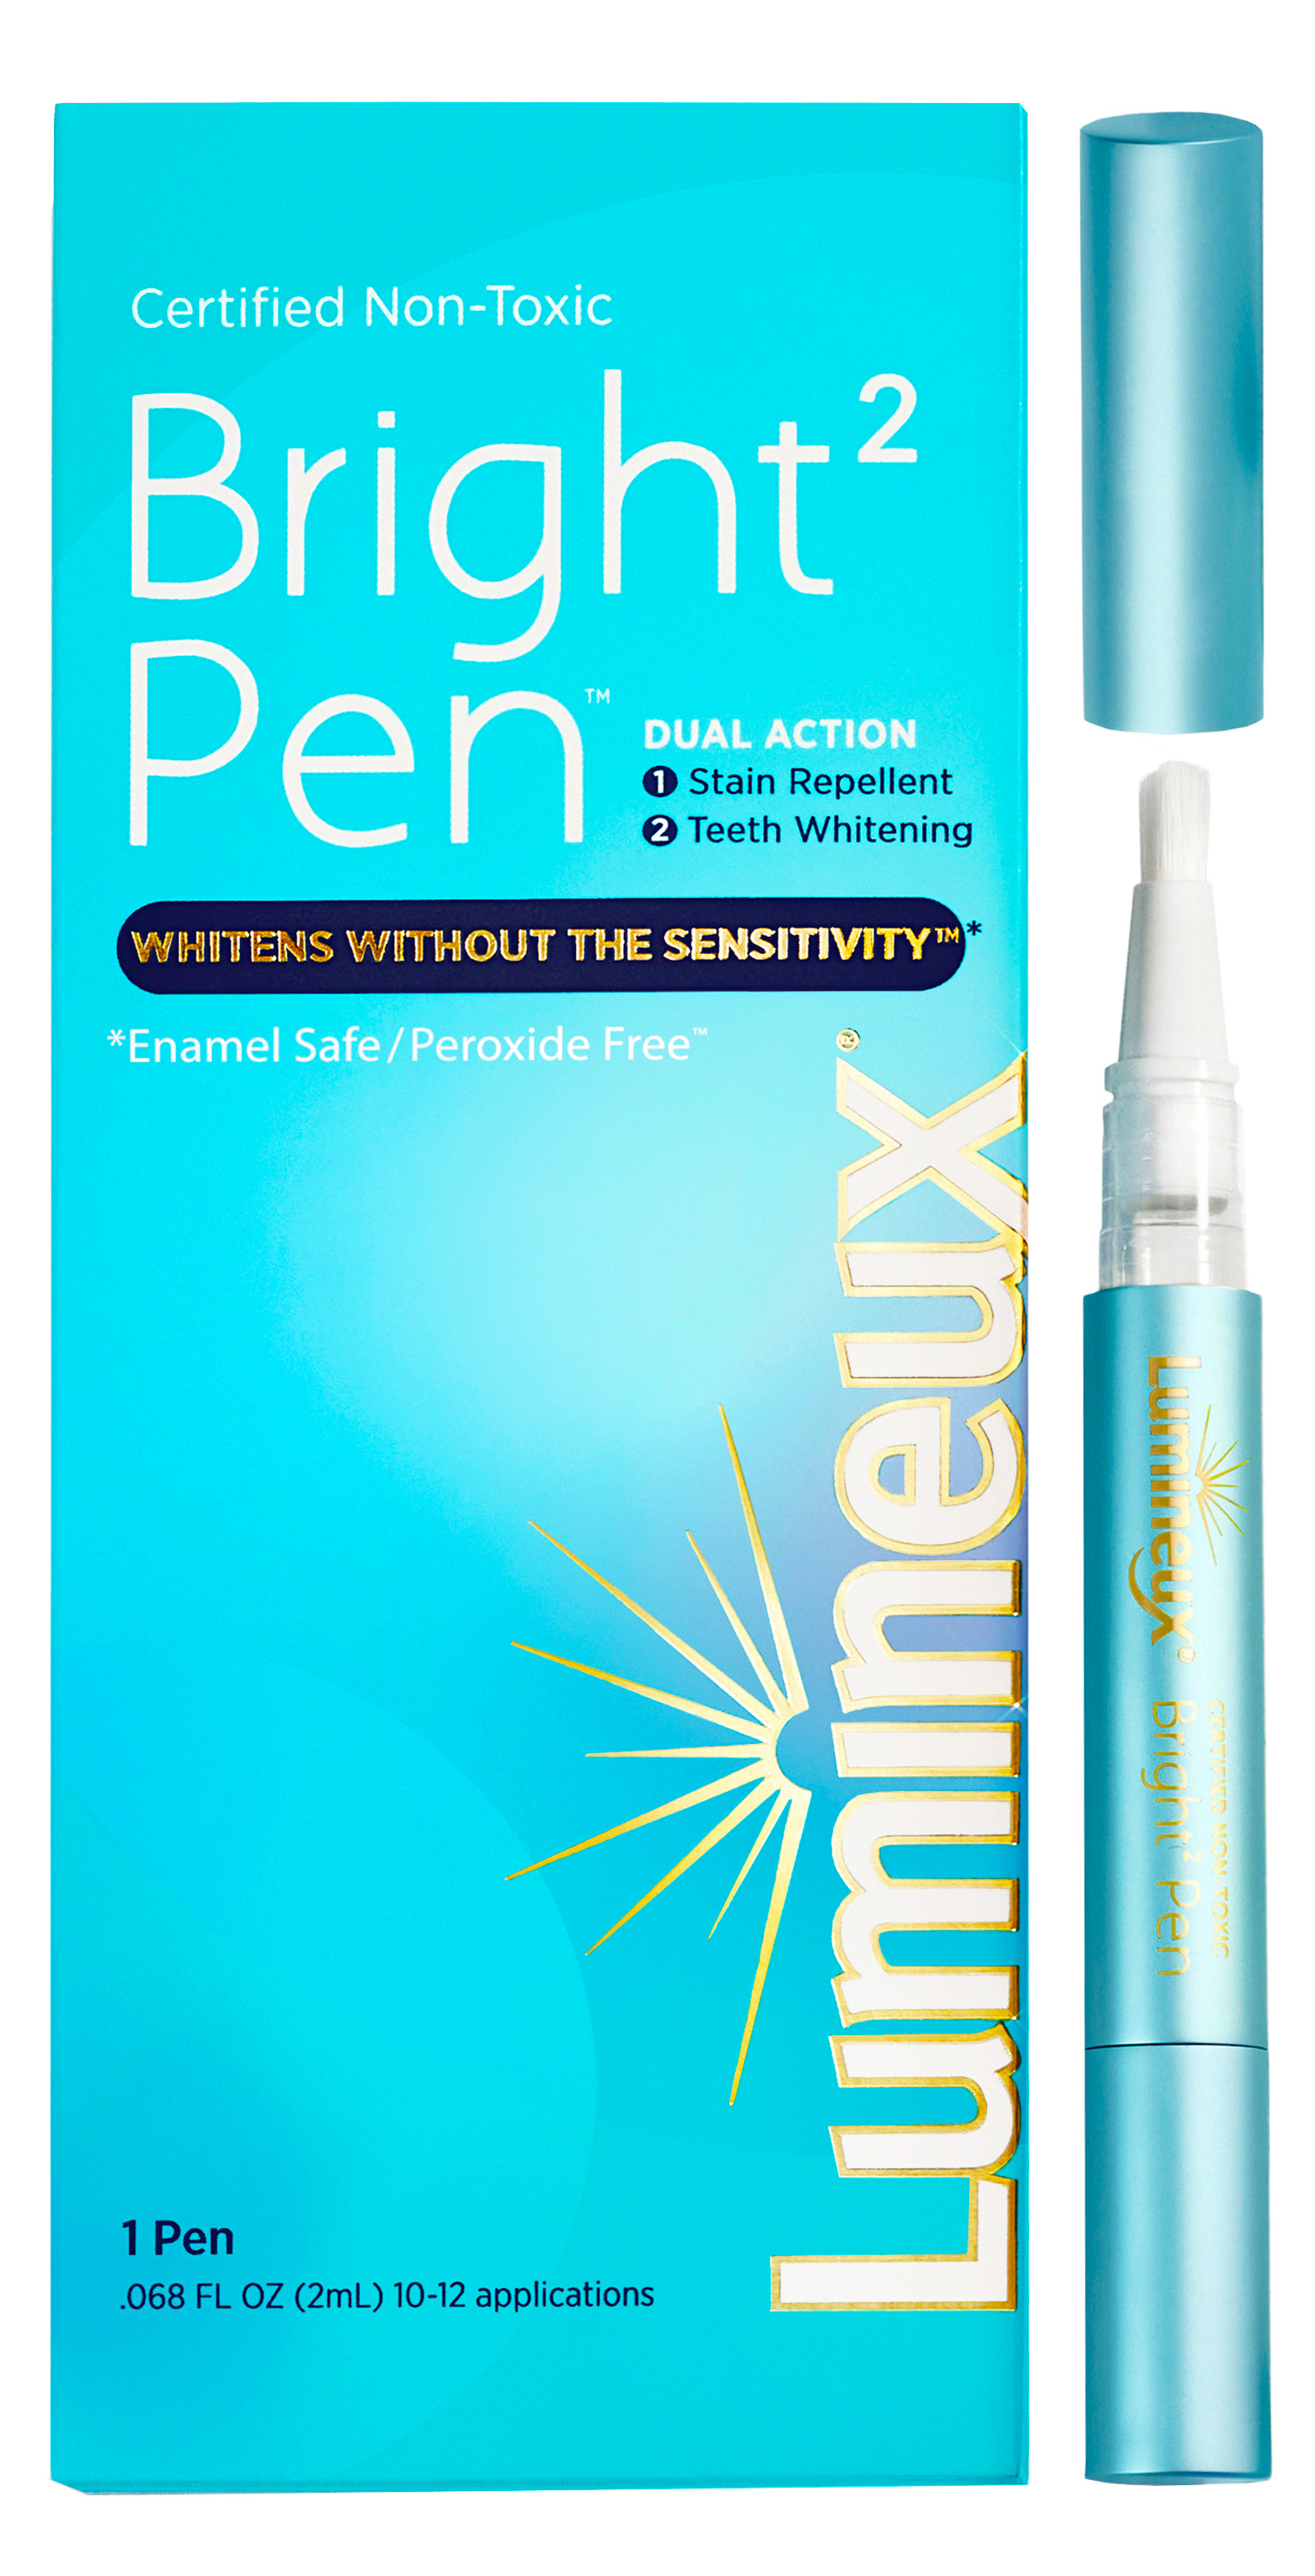 Lumineux Teeth Whitening & Dual Action Stain Repellant Bright, 2 Pens - image 1 of 15